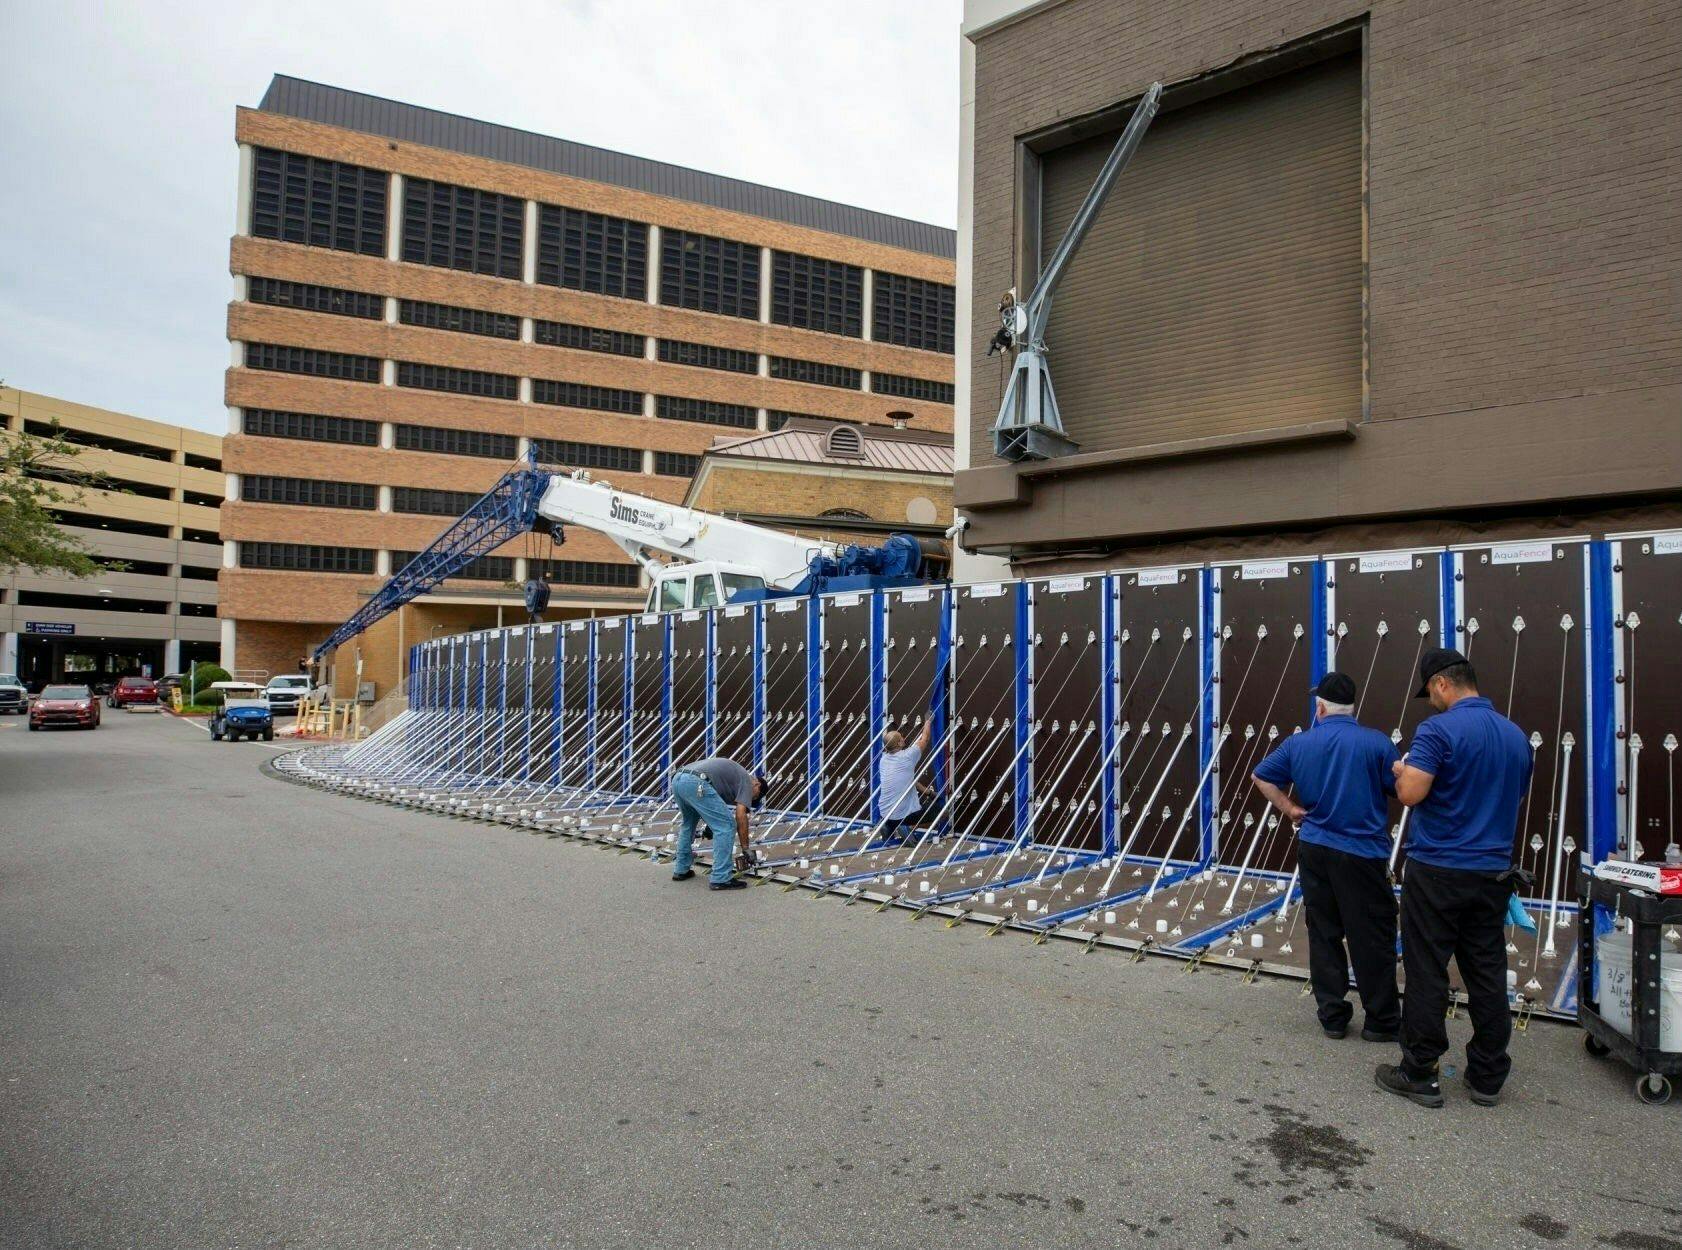 In addition to the AquaFence, Tampa General Hospital has detailed plans for delivery of fuel and other key supplies in a hurricane. (Photo: Tampa General Hospital)